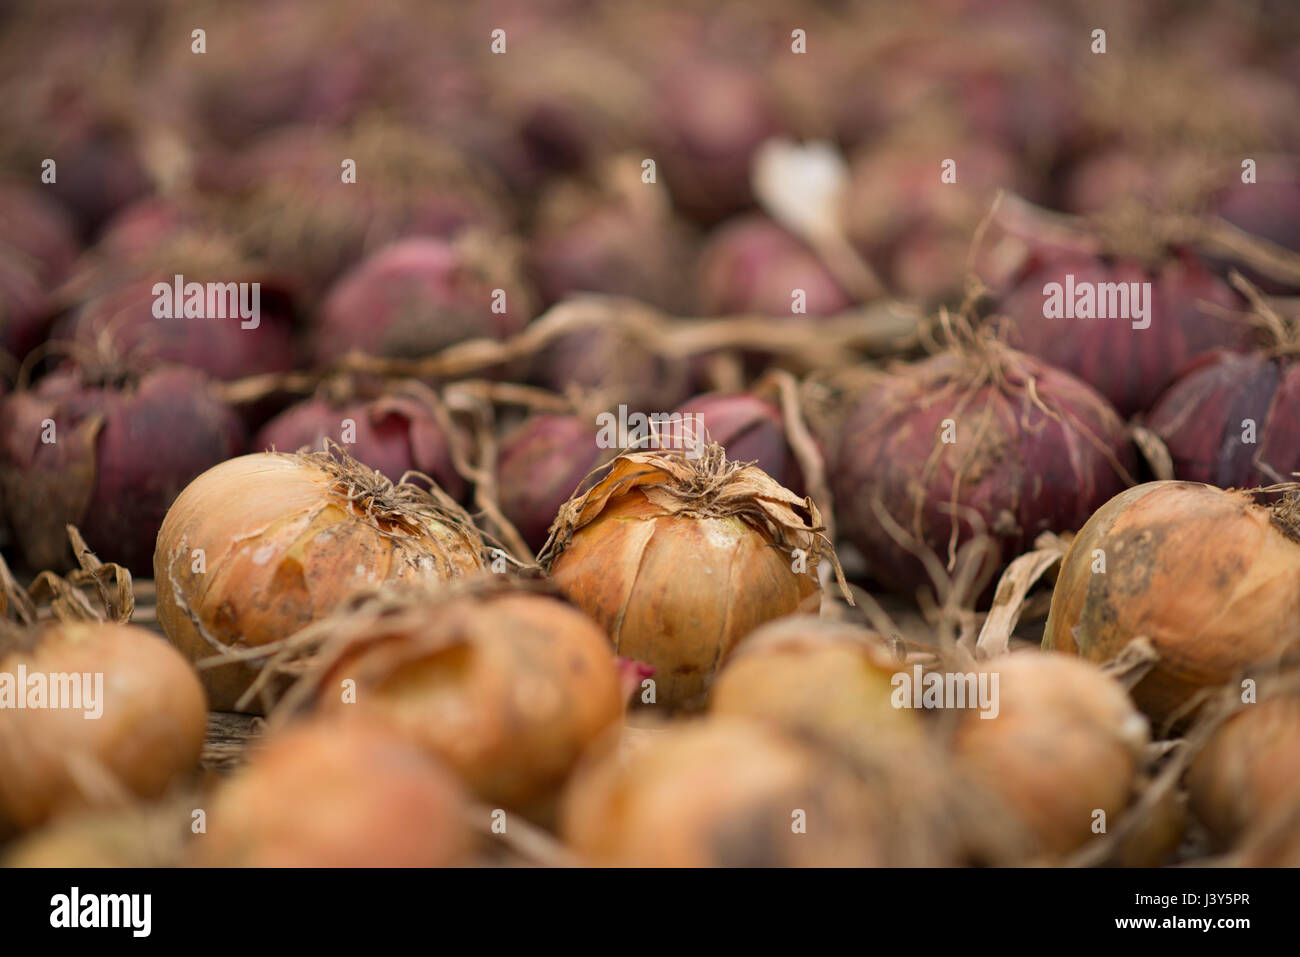 Onions in a greenhouse, Chipping, Lancashire. Stock Photo